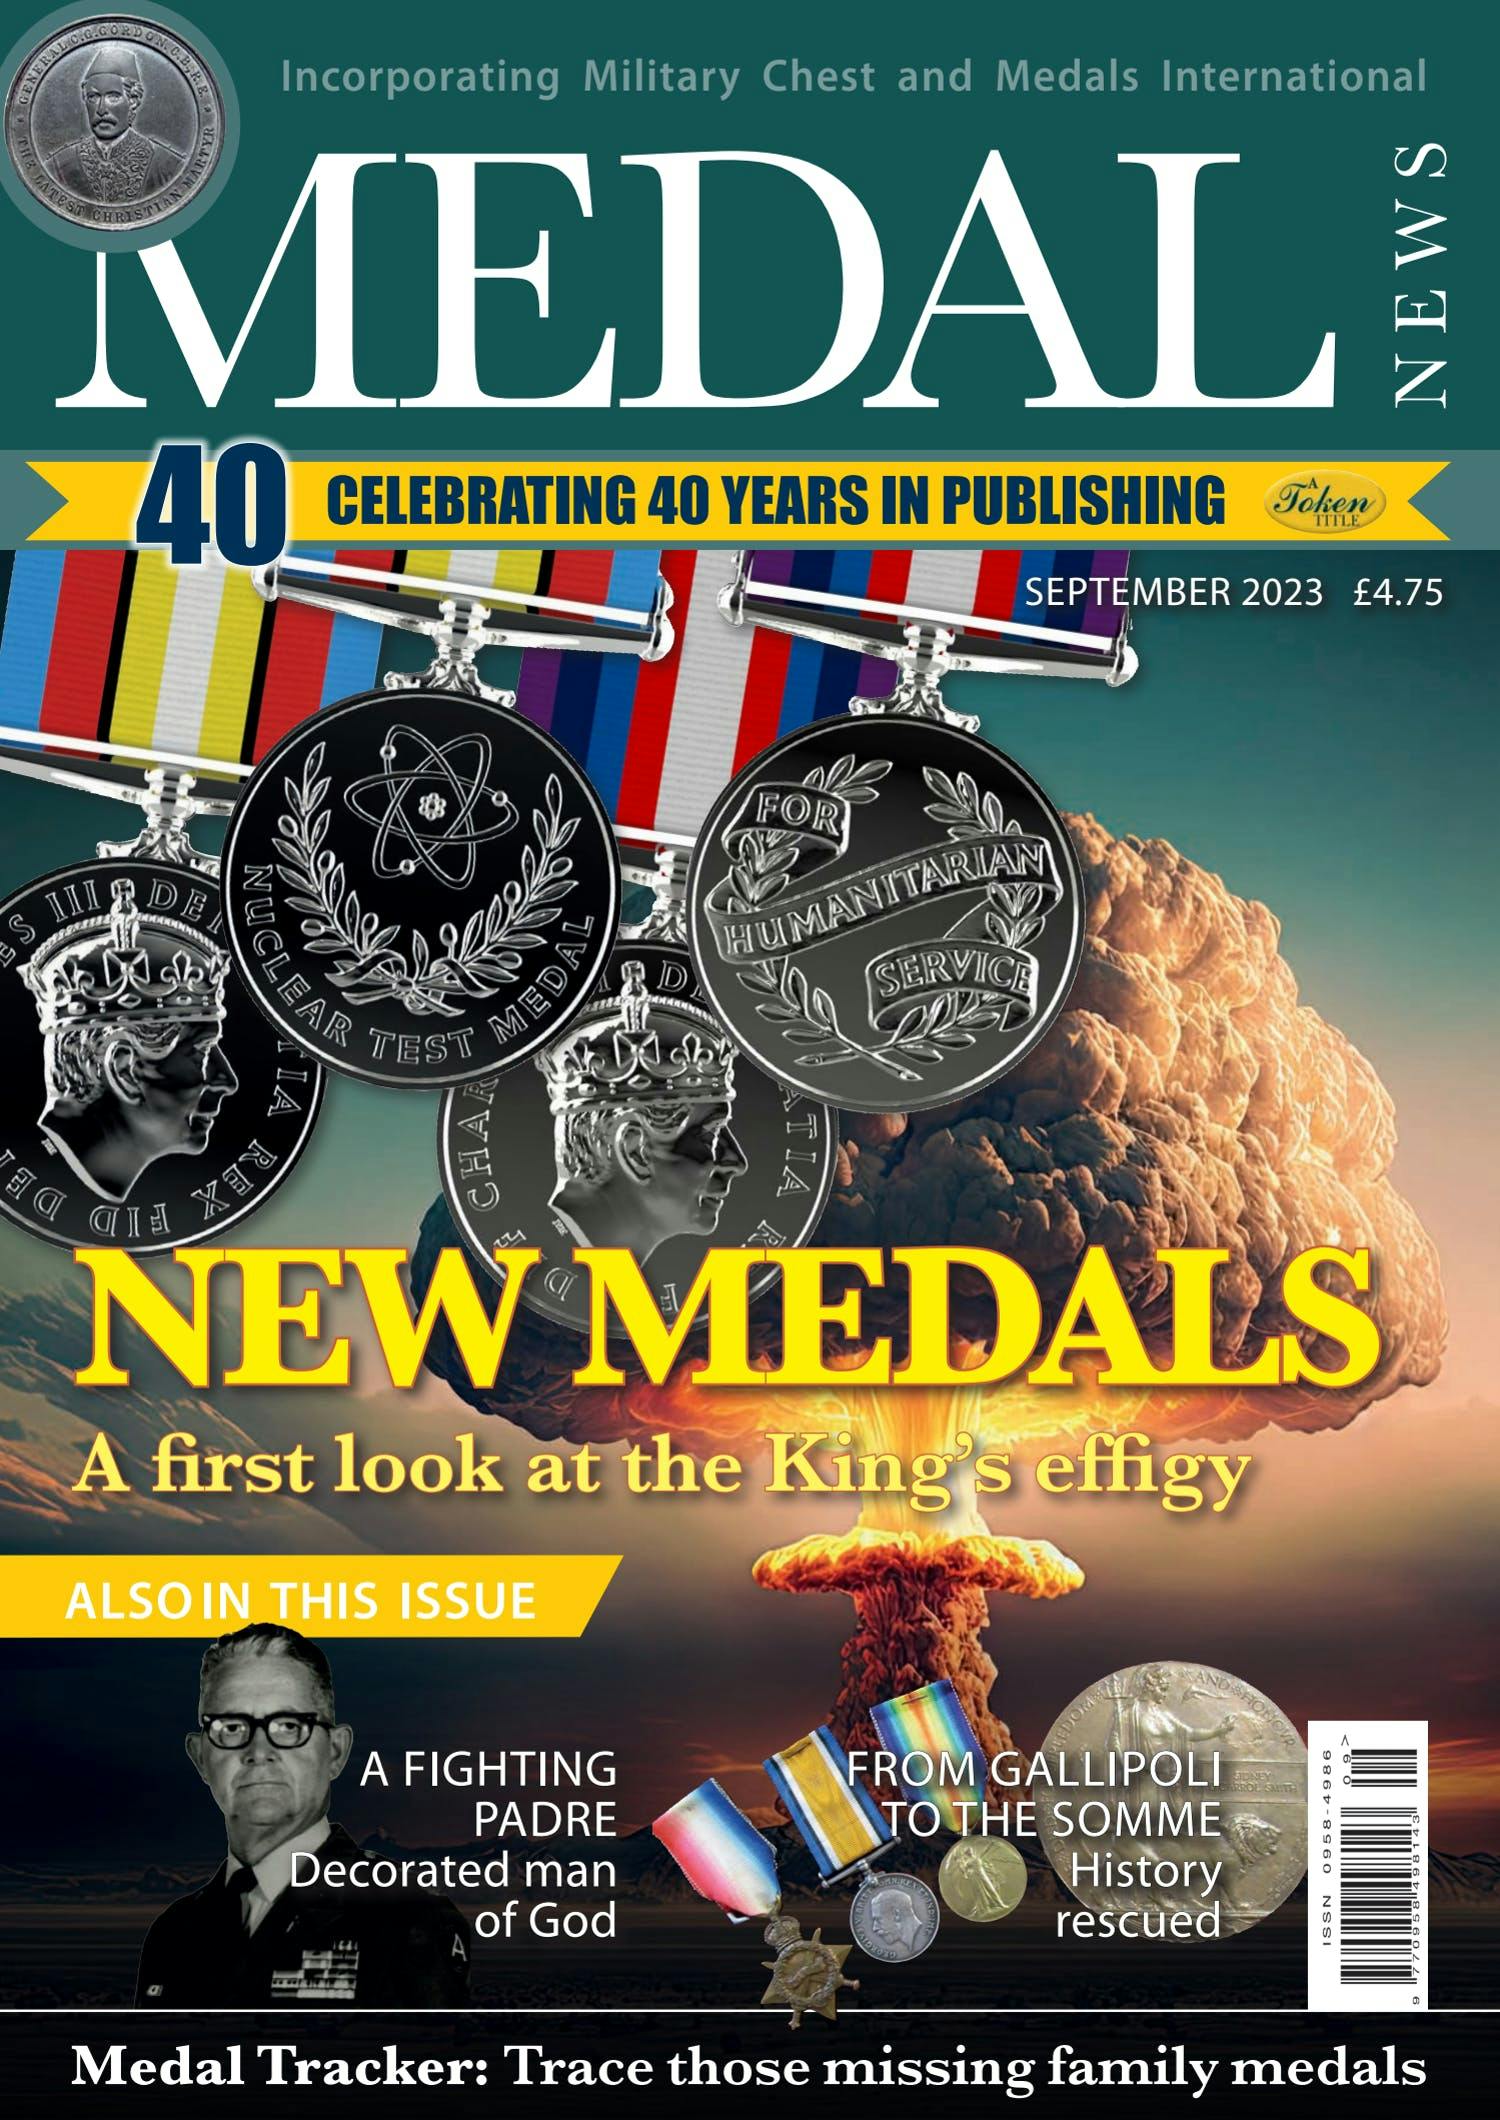 Front cover of 'New medals', Medal News September 2023, Volume 61, Number 8 by Token Publishing